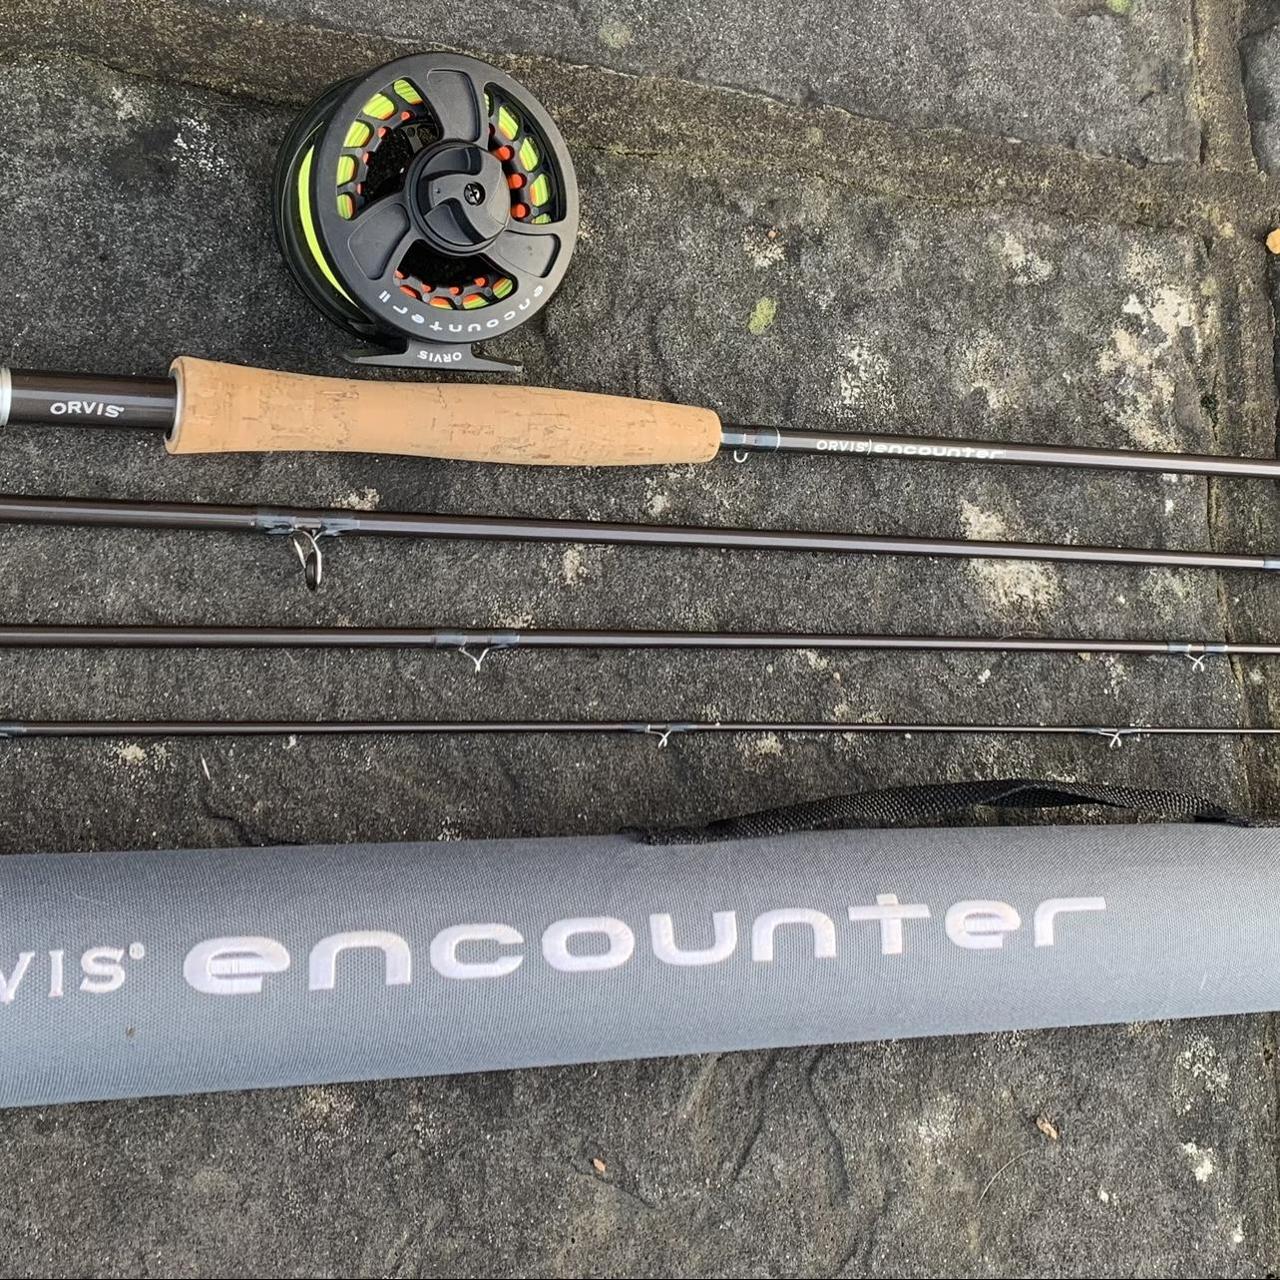 ORVIS ENCOUNTER 9ft 5wt FLY FISHING ROD, REEL, AND